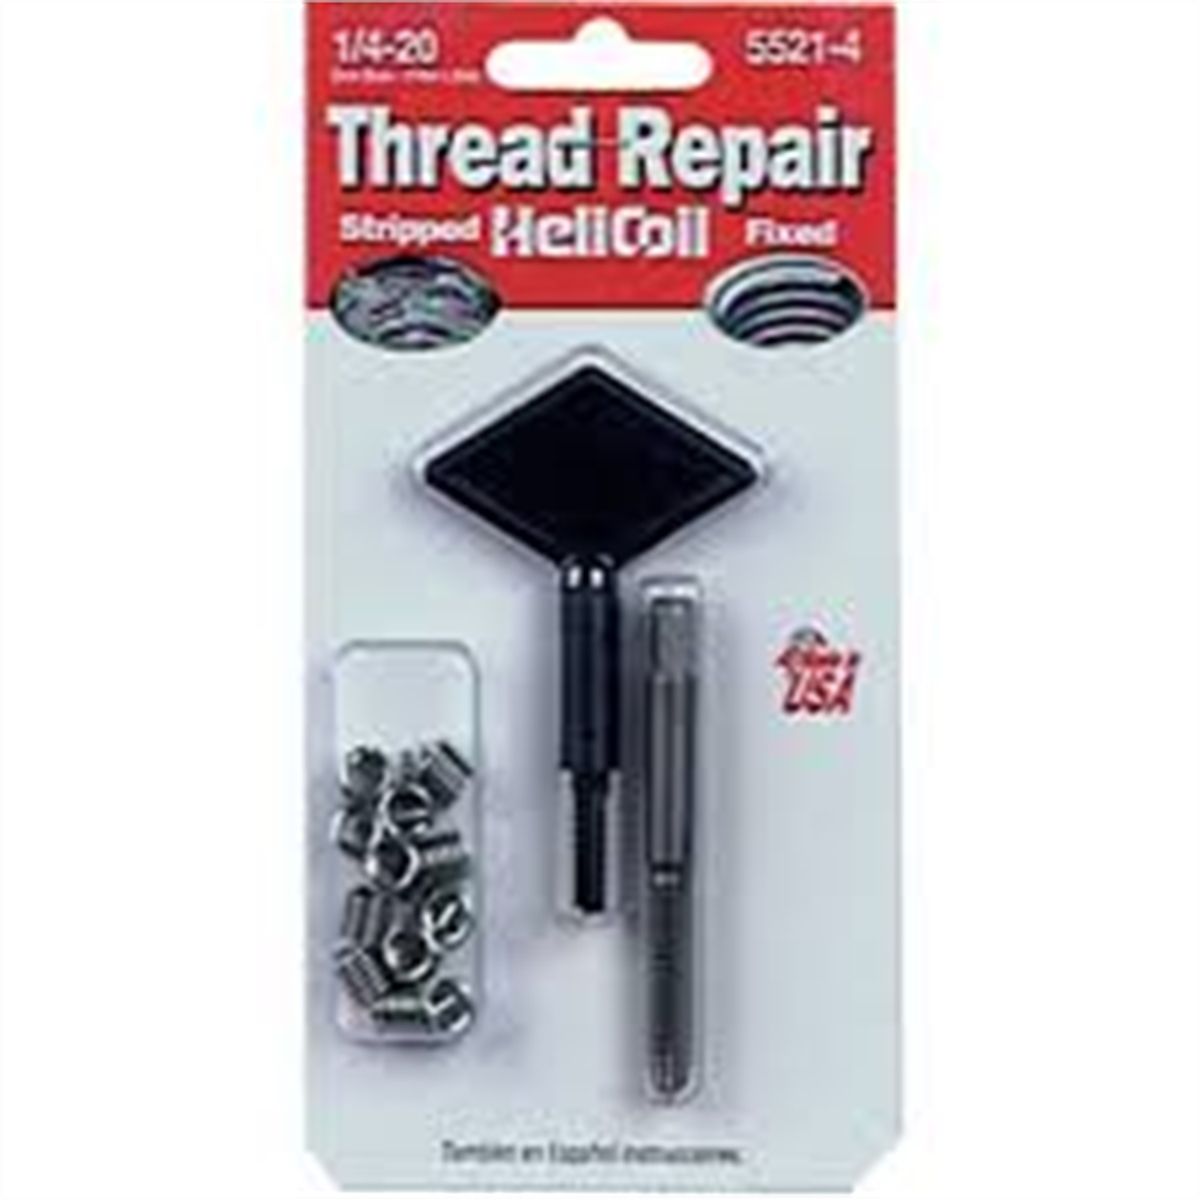 Fix Stripped Helicoil 5521-5 Thread Repair Kit 5/16-18 Drill Size 21/64 .328 